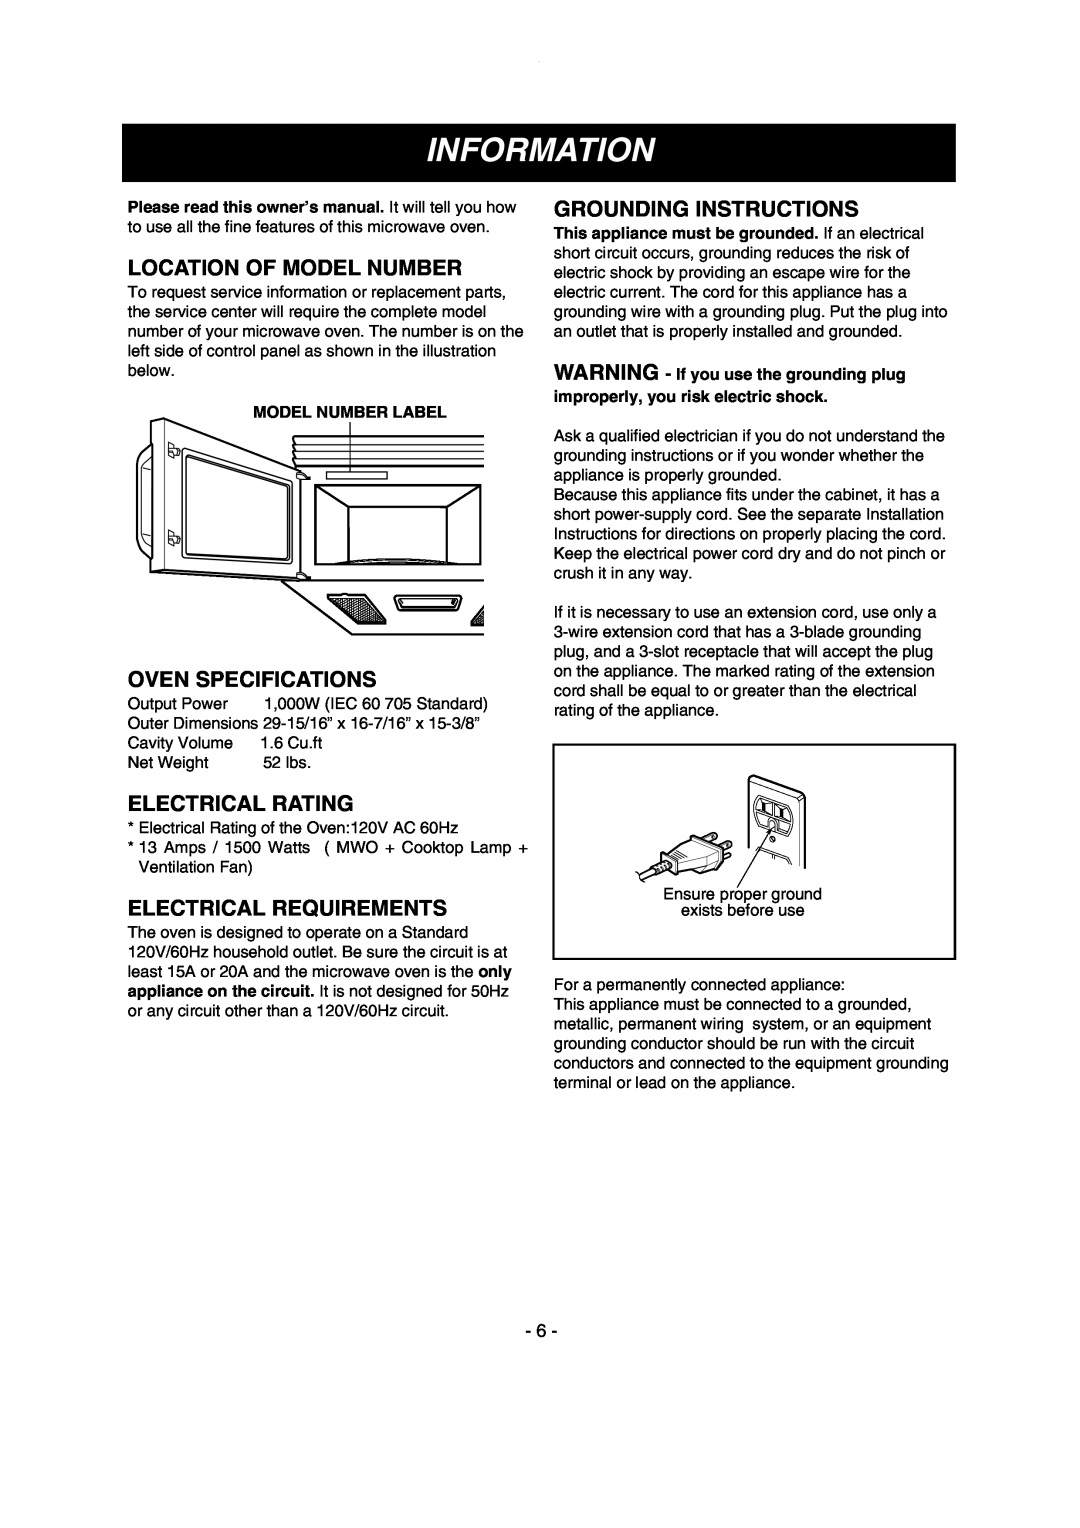 LG Electronics MV1615W, MV1615B owner manual Information, Location Of Model Number, Oven Specifications, Electrical Rating 